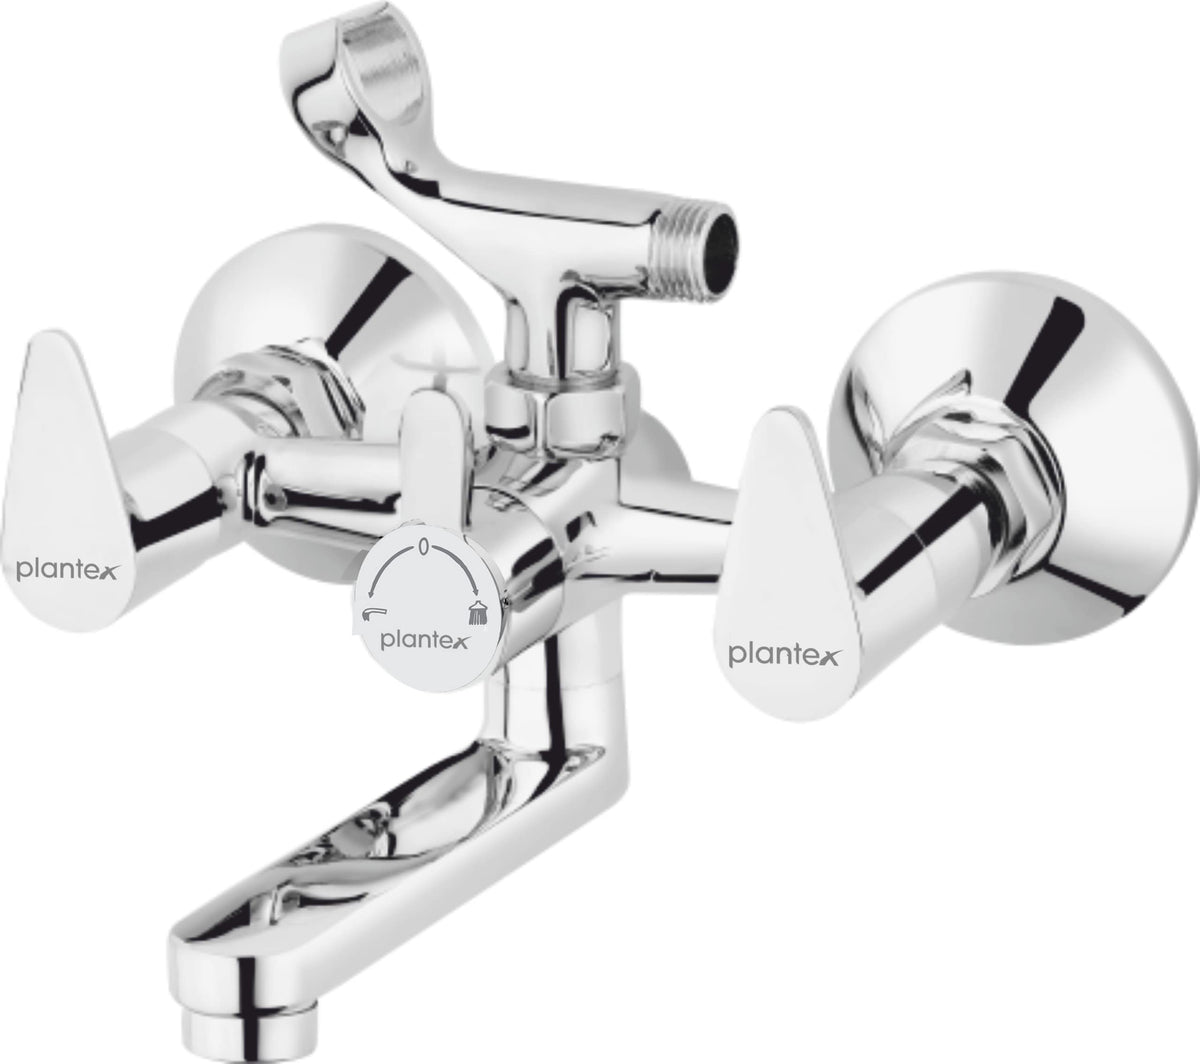 Plantex Pure Brass PAC-1817 Telephonic 2-in-1 Wall Mixer with Crutch Hot & Cold Arrangement for Bathroom, with Brass Wall Flange & Teflon Tape (Mirror-Chrome Finish)